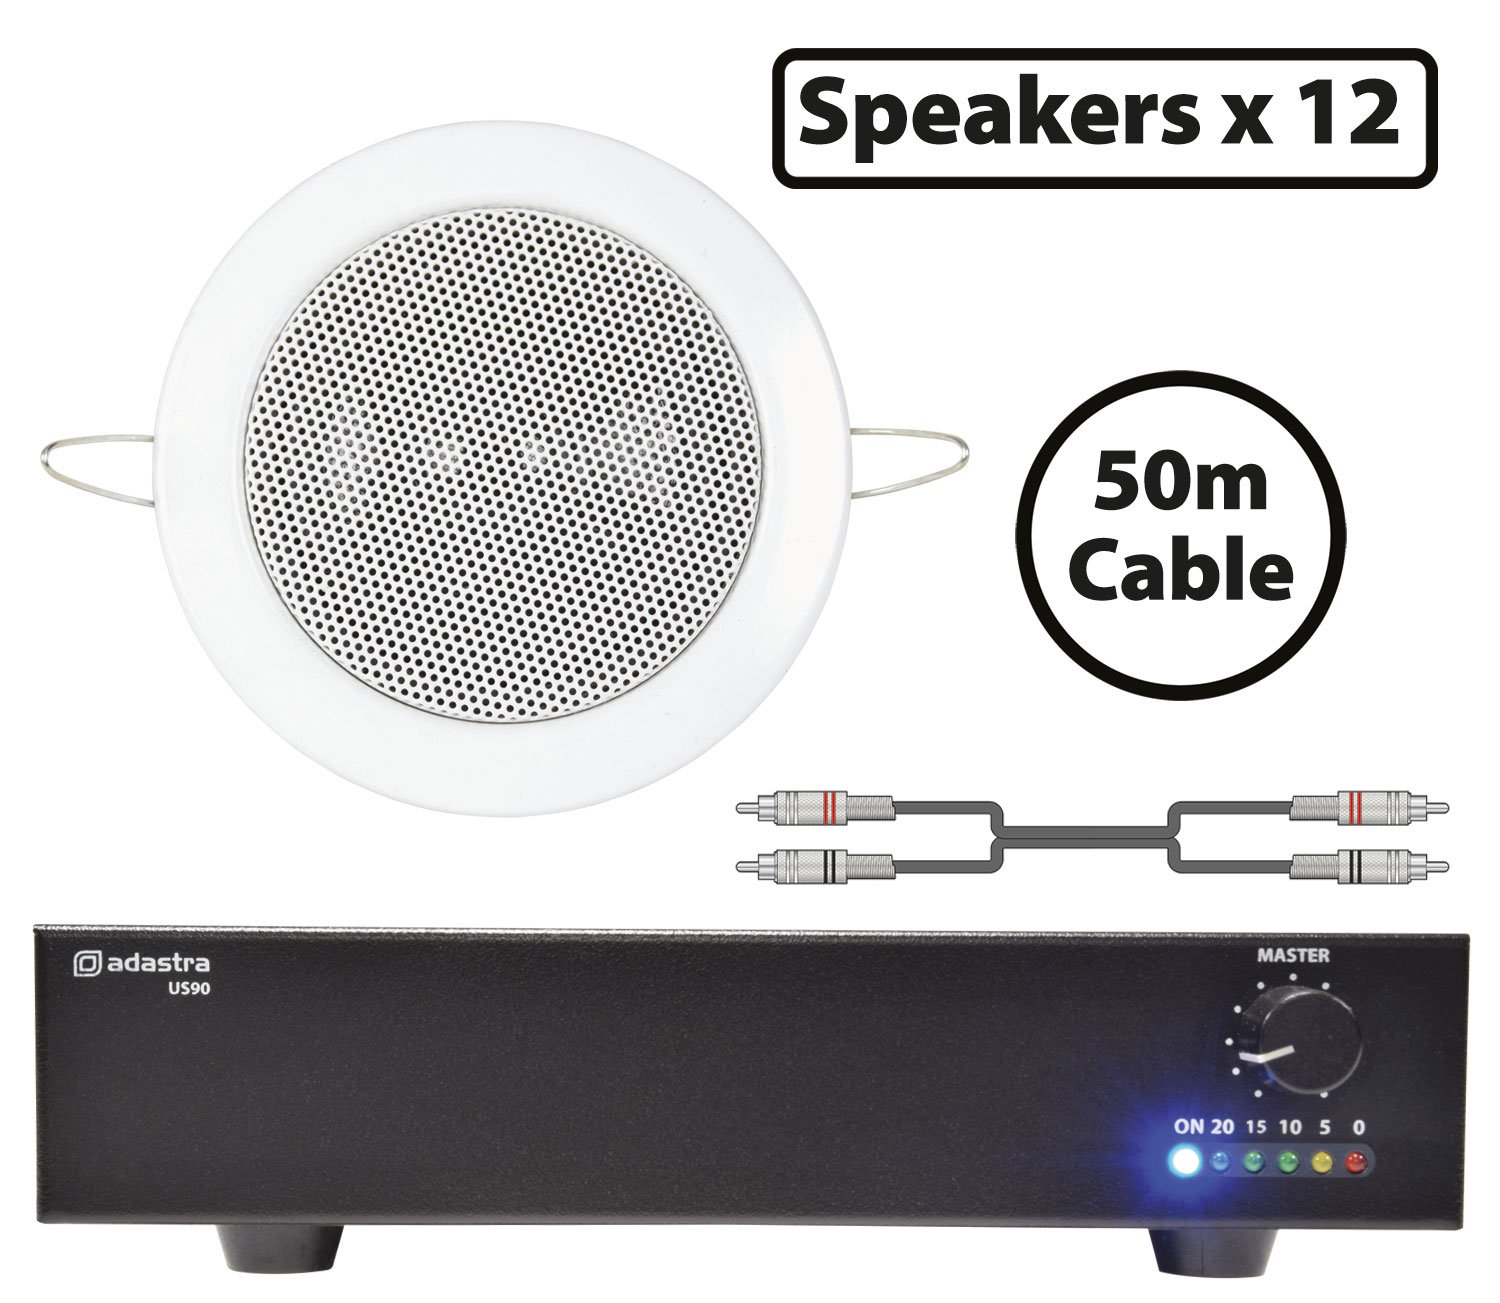 Add-on 100V Washroom / Corridor Ceiling Speaker Packages 12 x Mini Ceiling Speakers 3" with Compact 90W Slave Amp